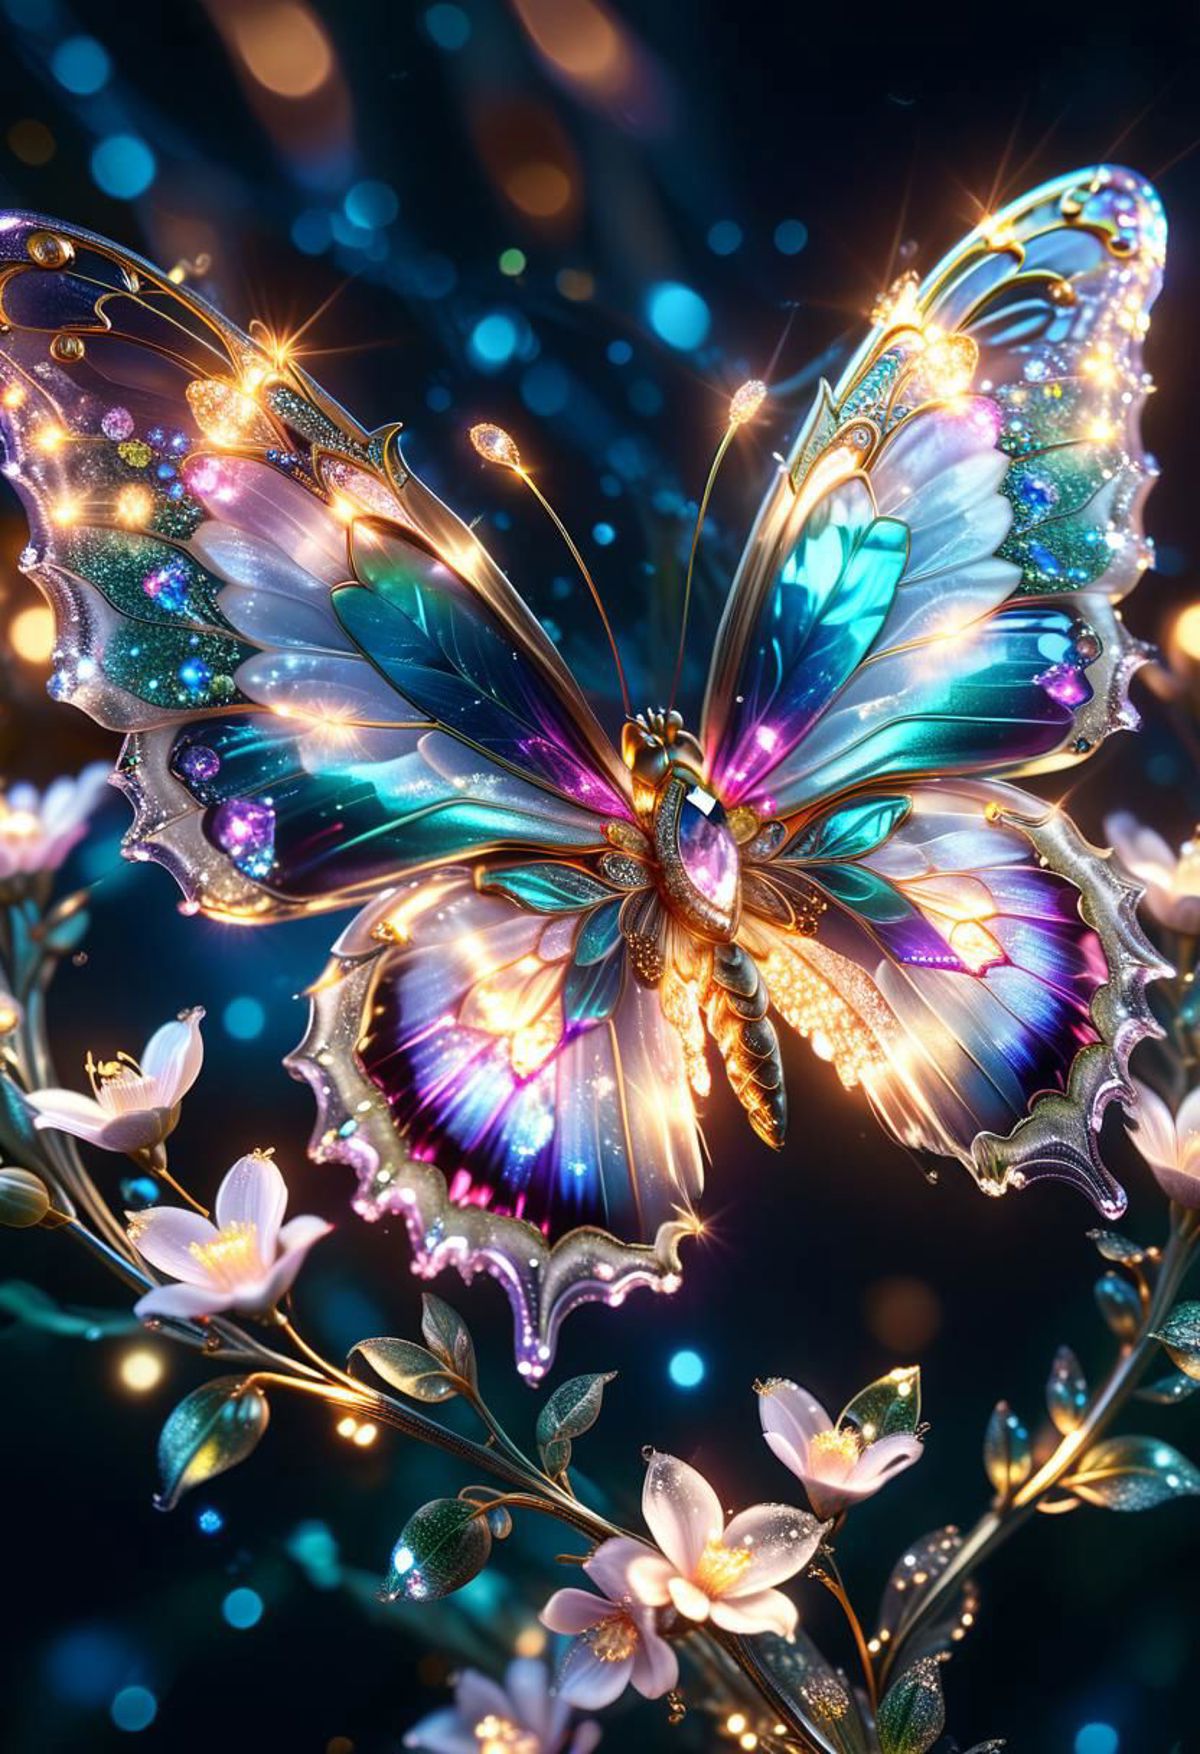 Artistic and Colorful Digital Art of a Butterfly with Purple and Blue Wings Sitting on a Flower.